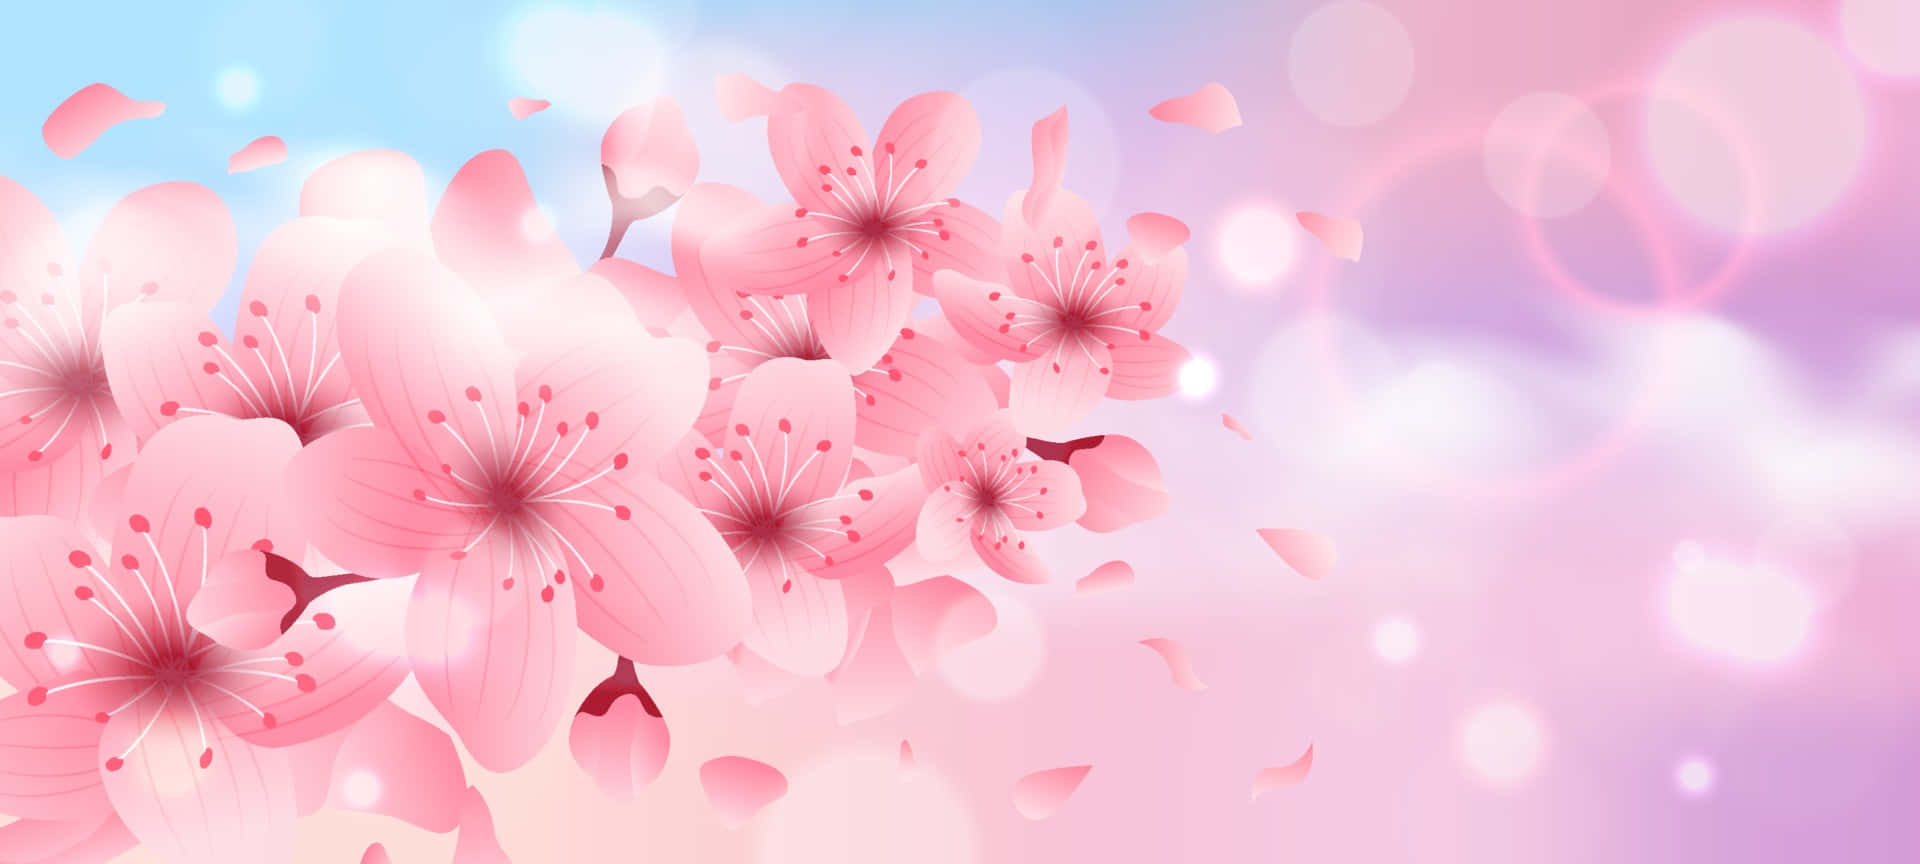 A Pink Flower Background With Bokeh Lights Wallpaper